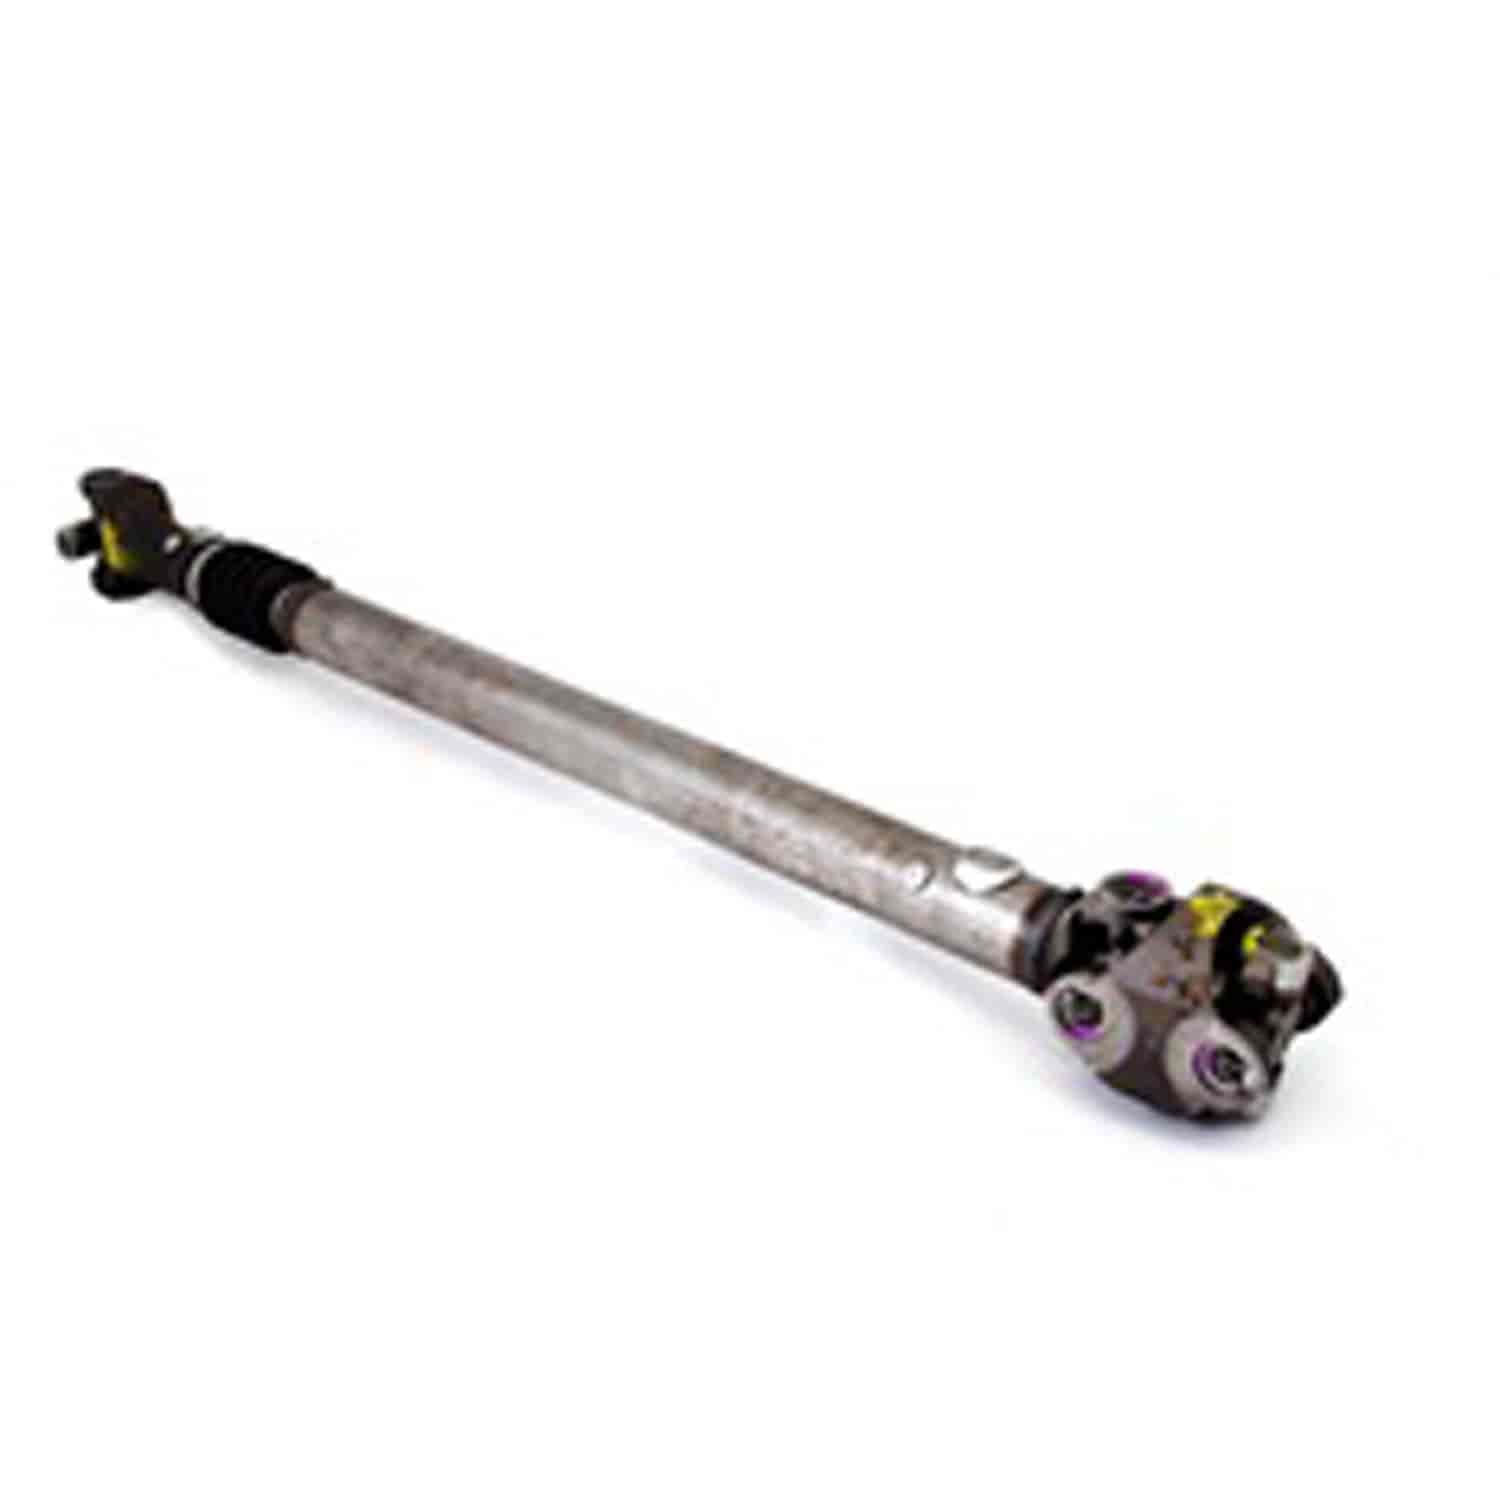 Stock replacement front driveshaft from Omix-ADA, Fits 03-05 Jeep Wrangler TJ with a 2.4 liter 4